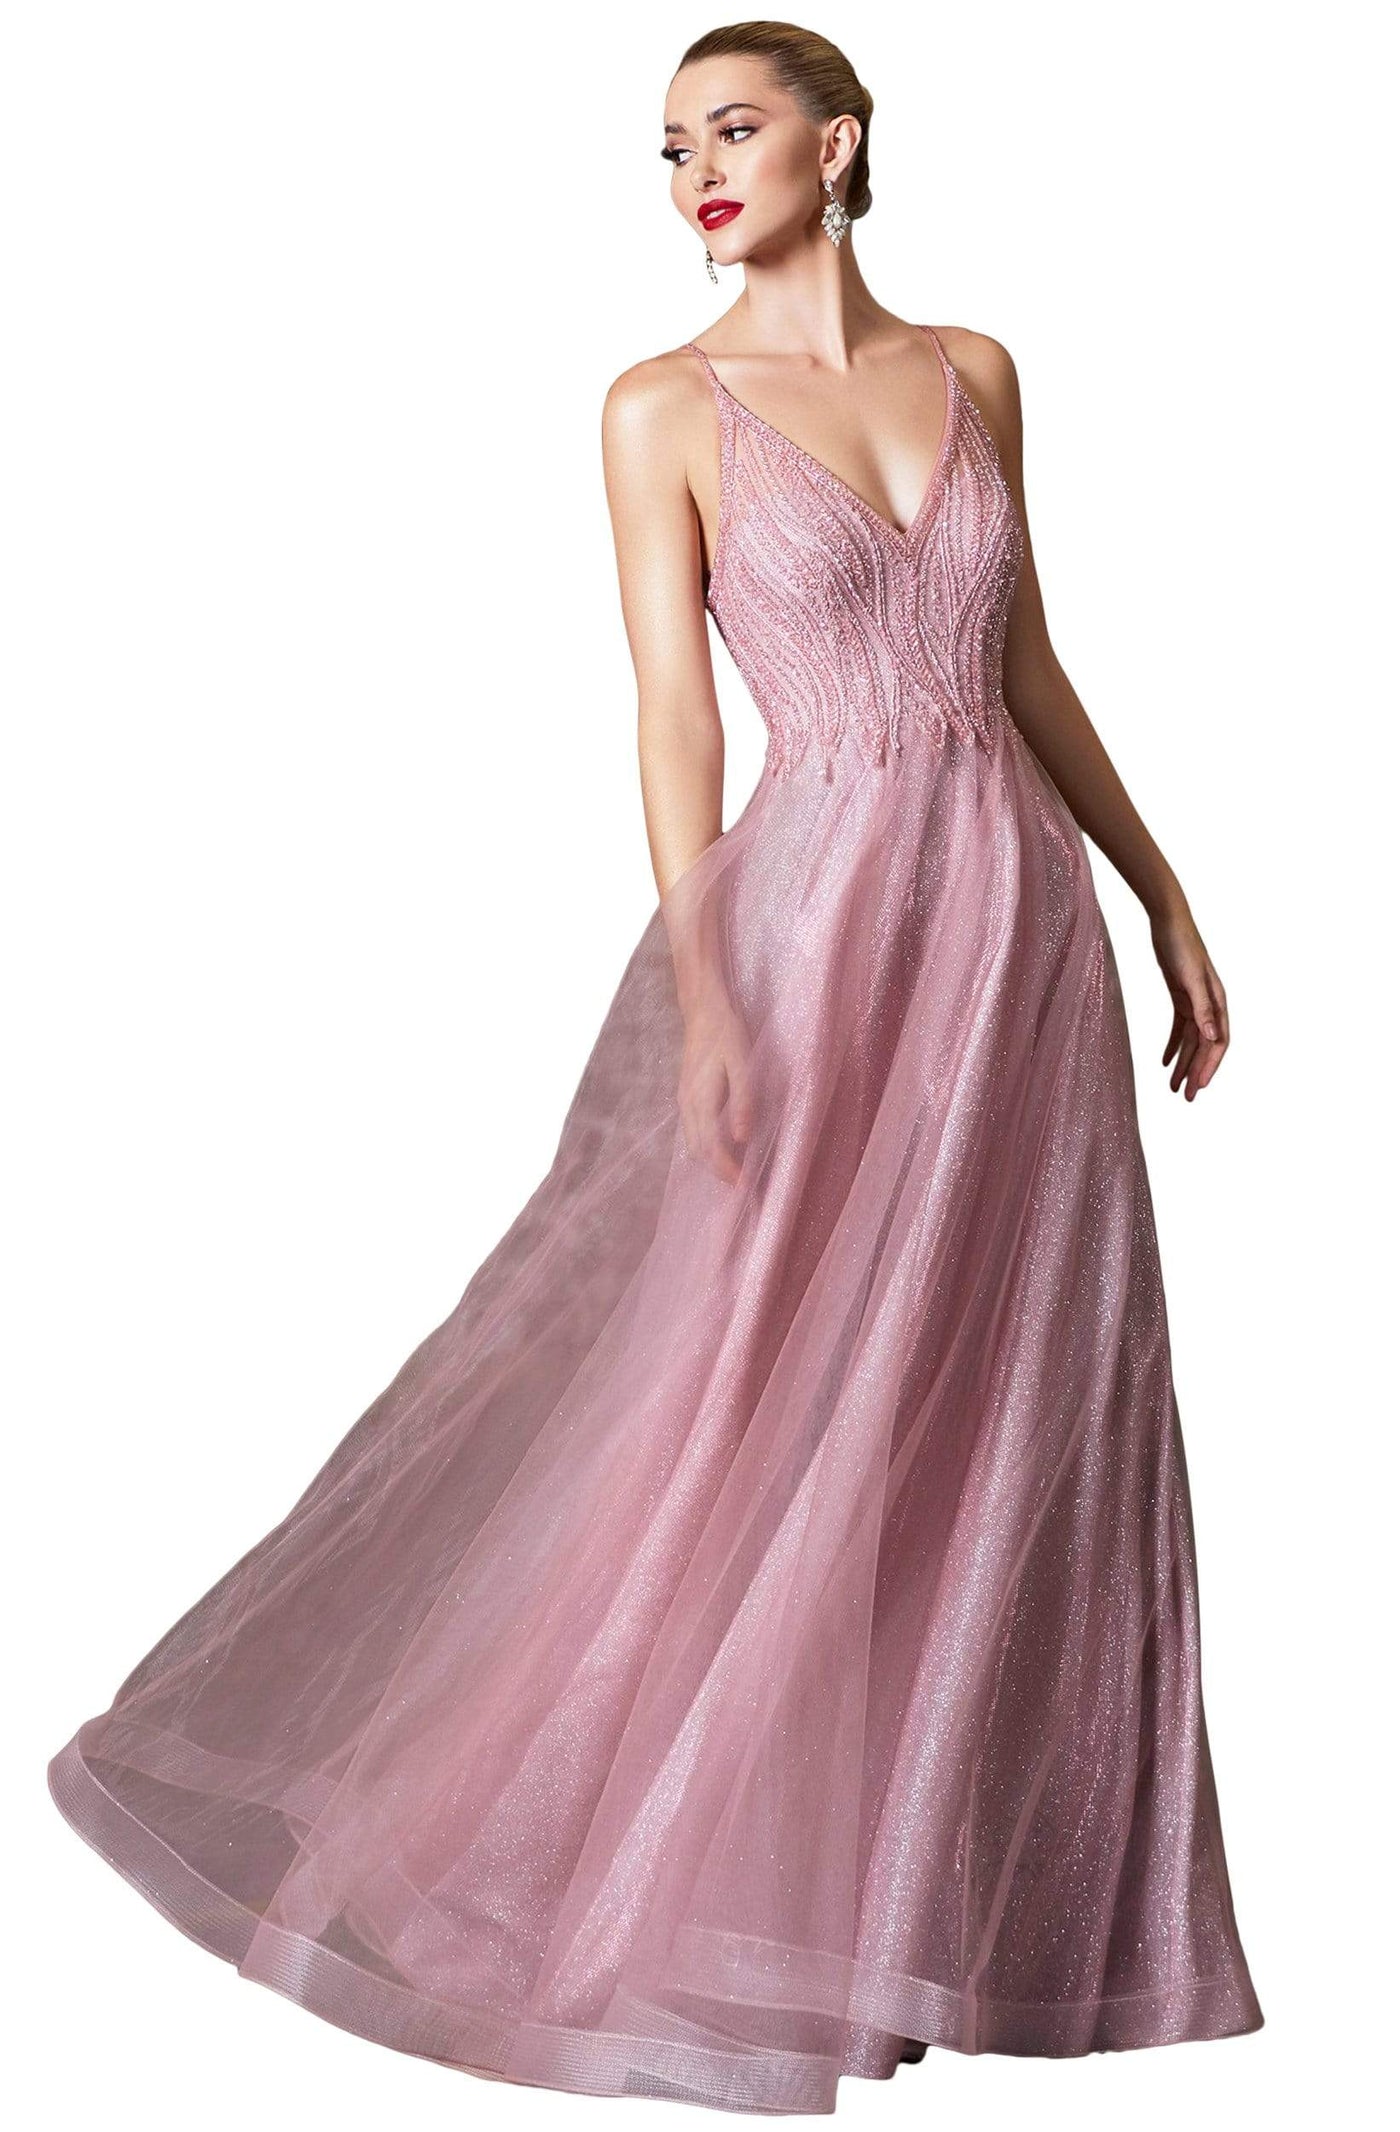 Cinderella Divine - CD910 Bead-Textured Bodice Glitter A-Line Gown Prom Dresses 2 / Rose